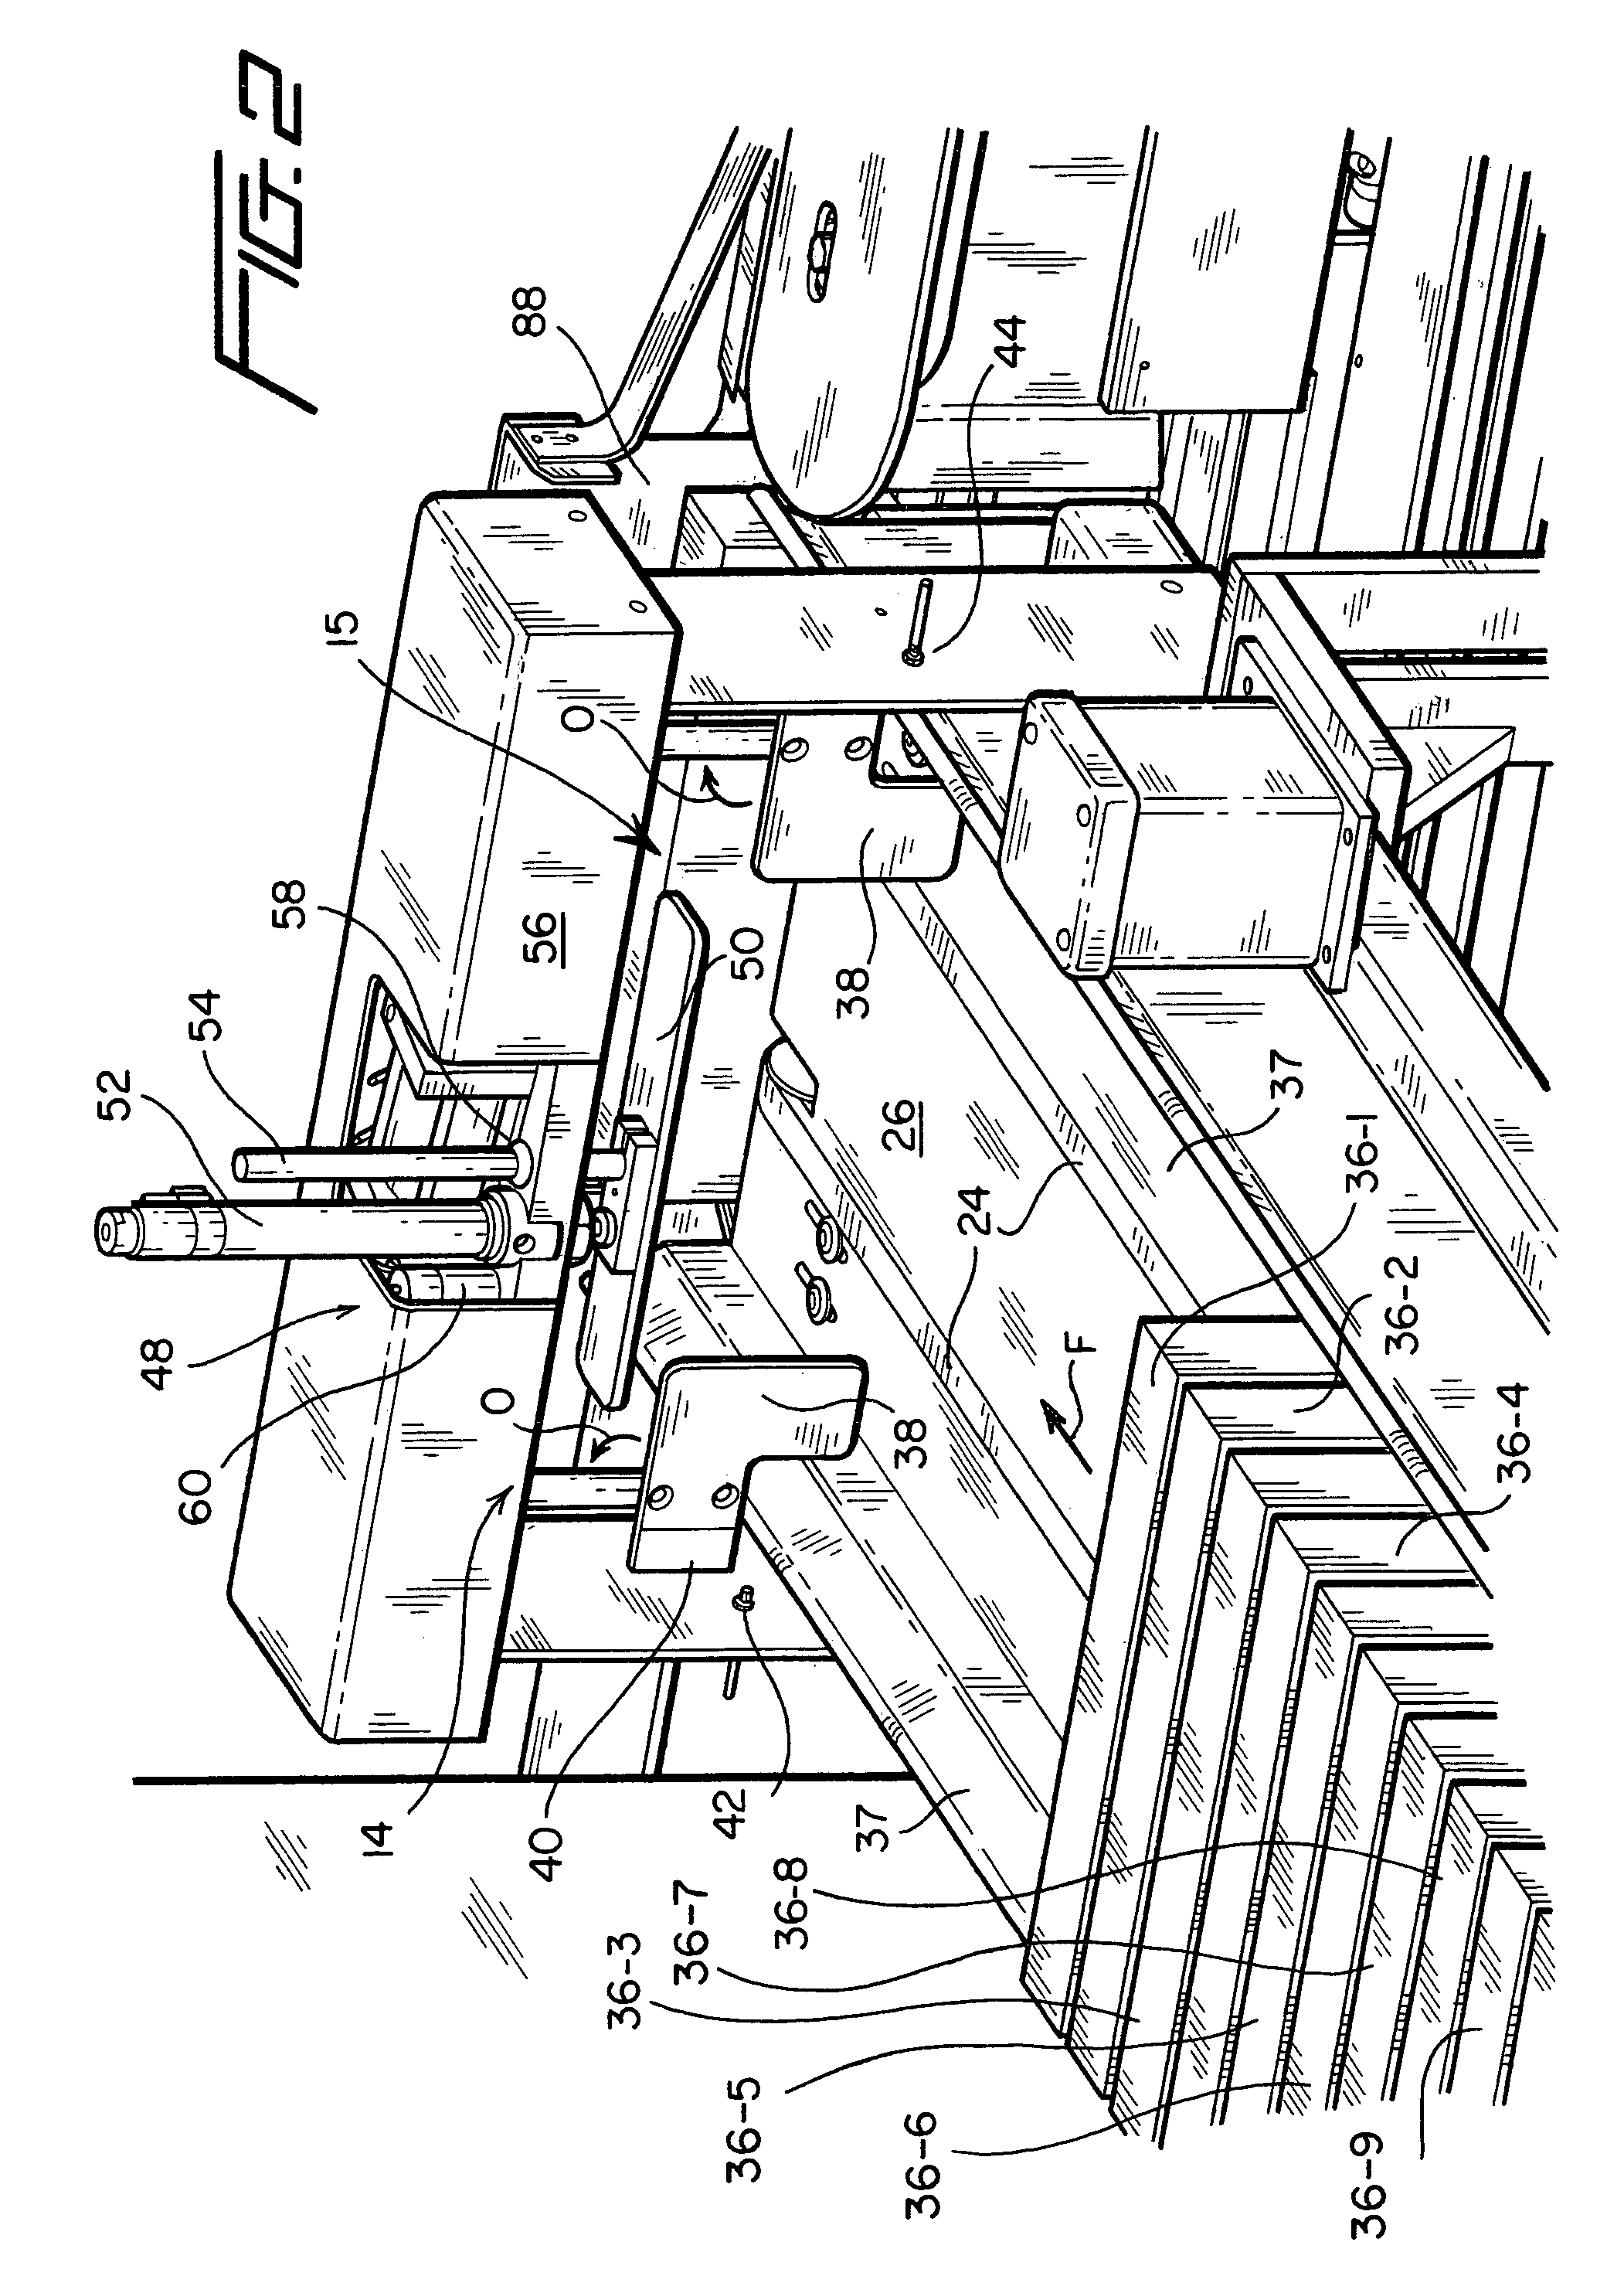 Synchronized stamp applicator machine and method of operating the same